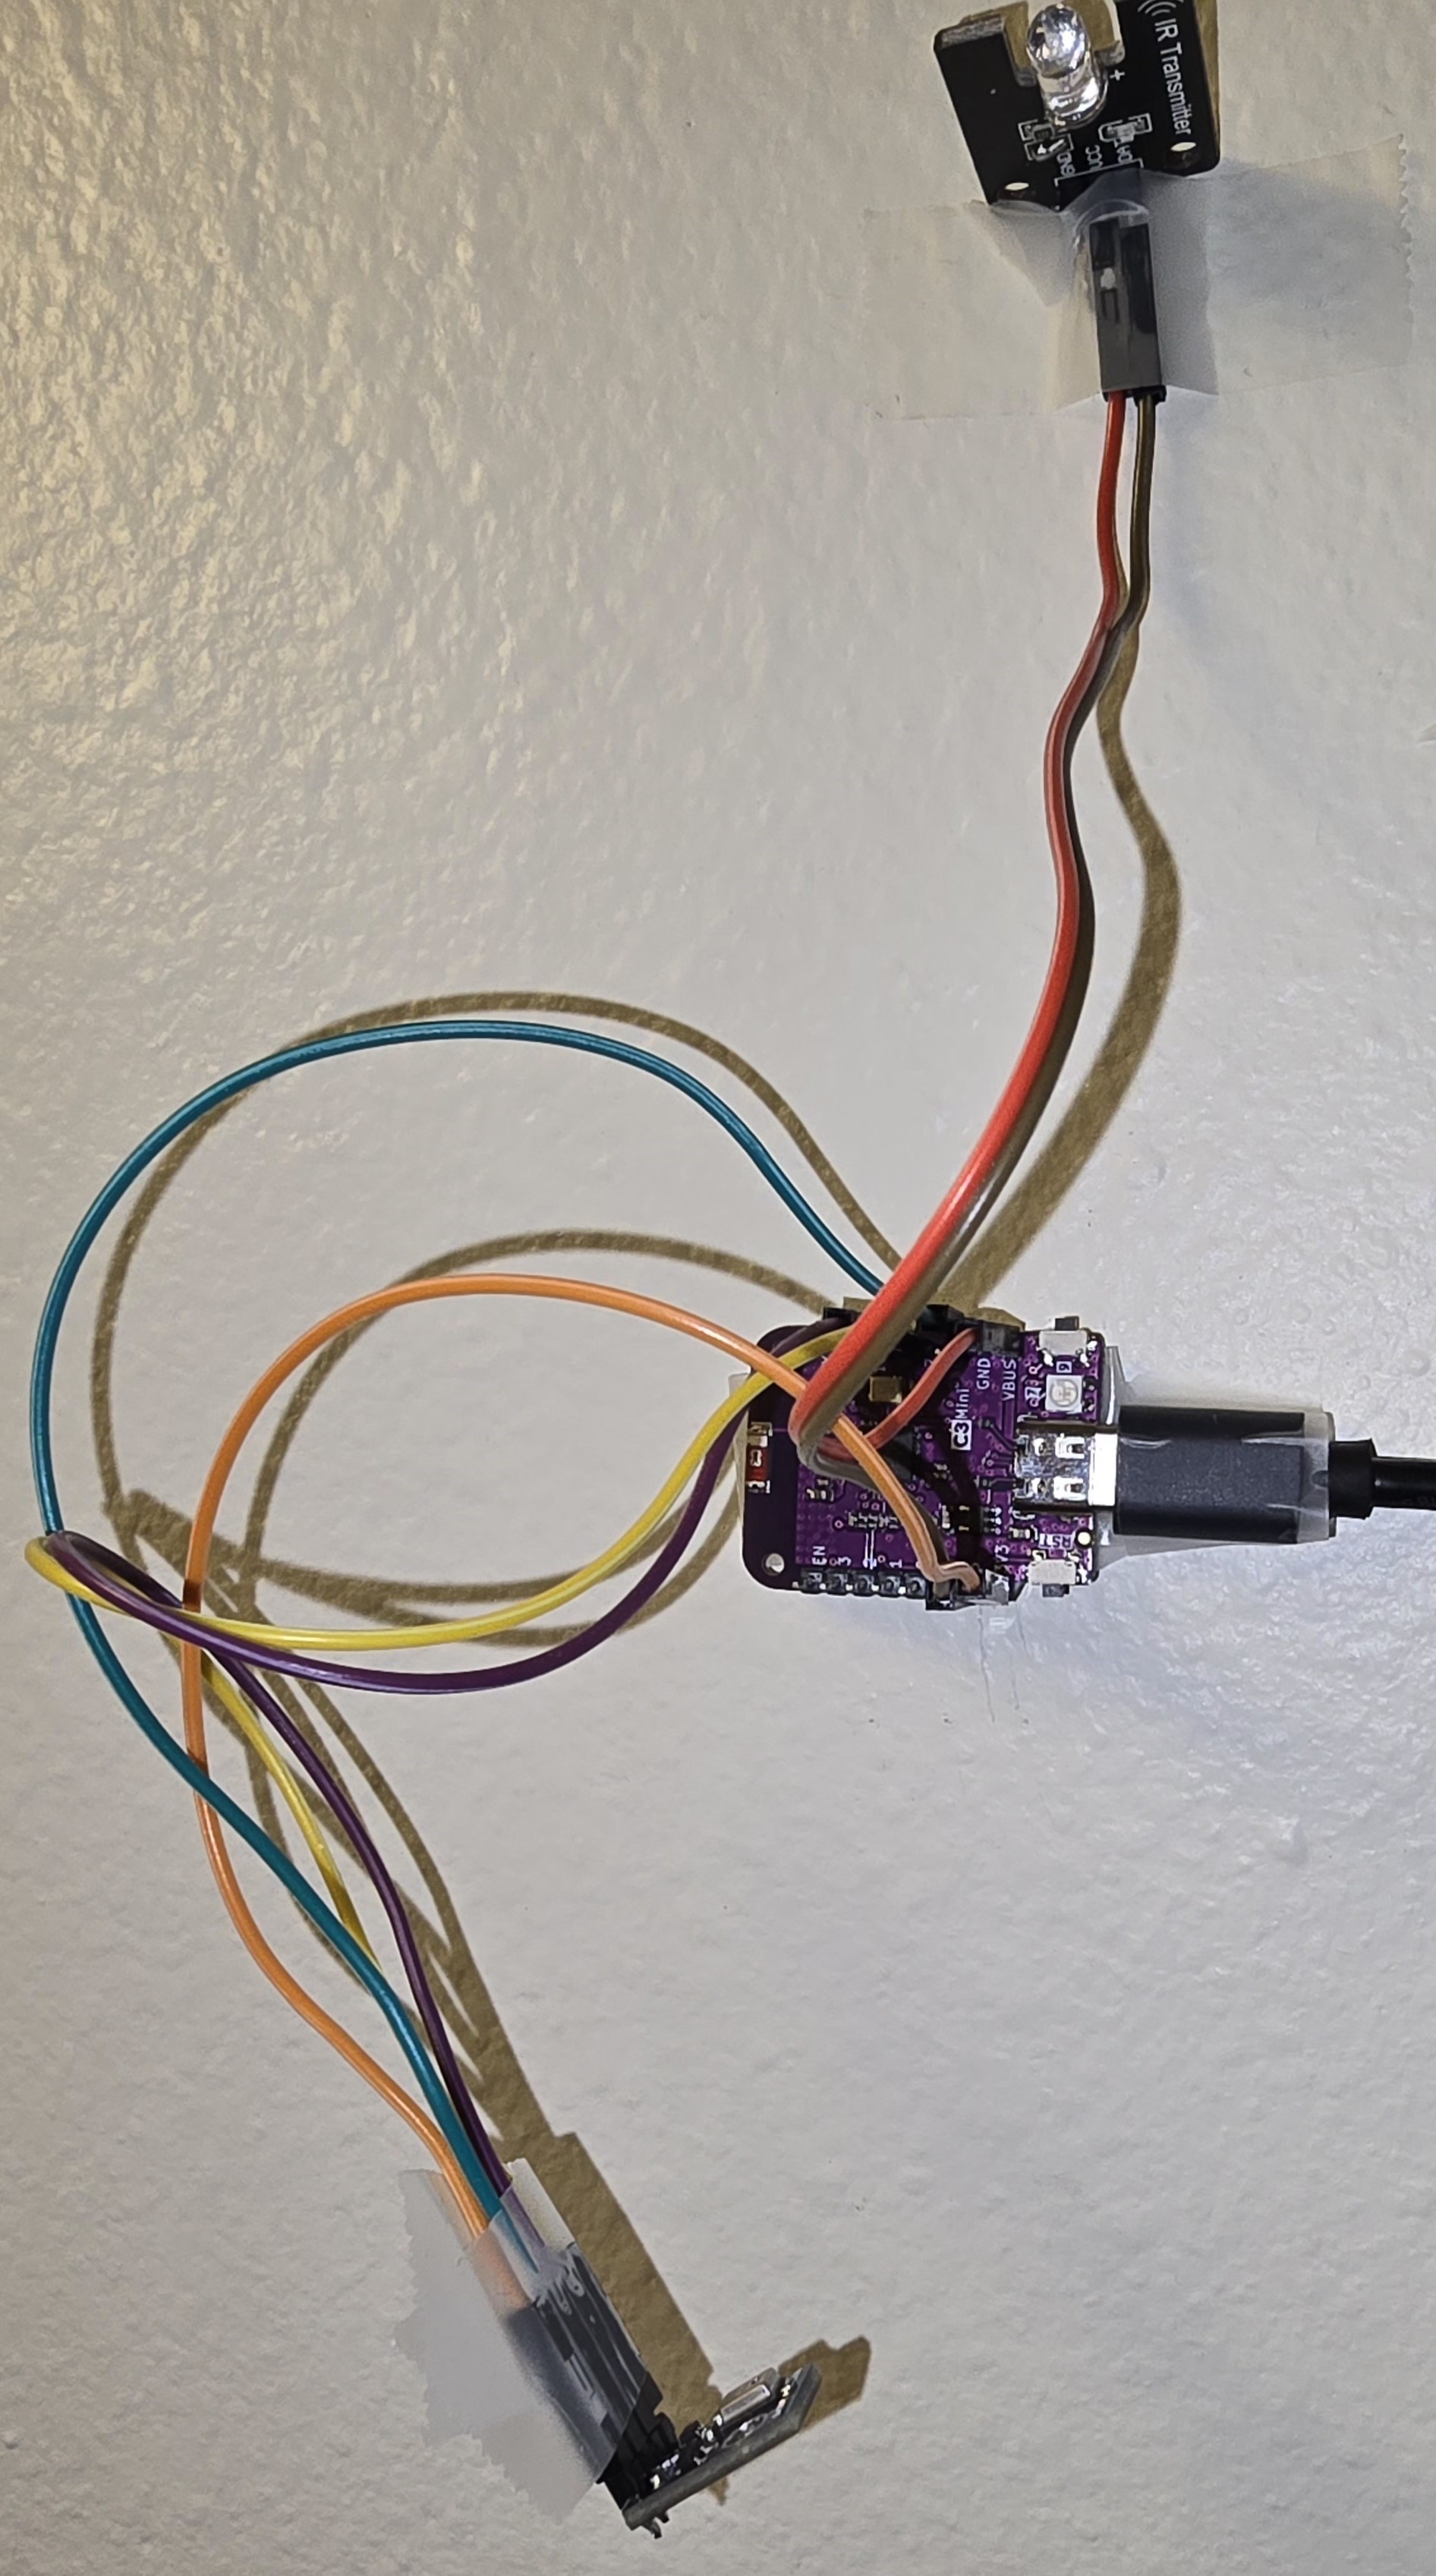 microcontroller attached to sensors and ir led